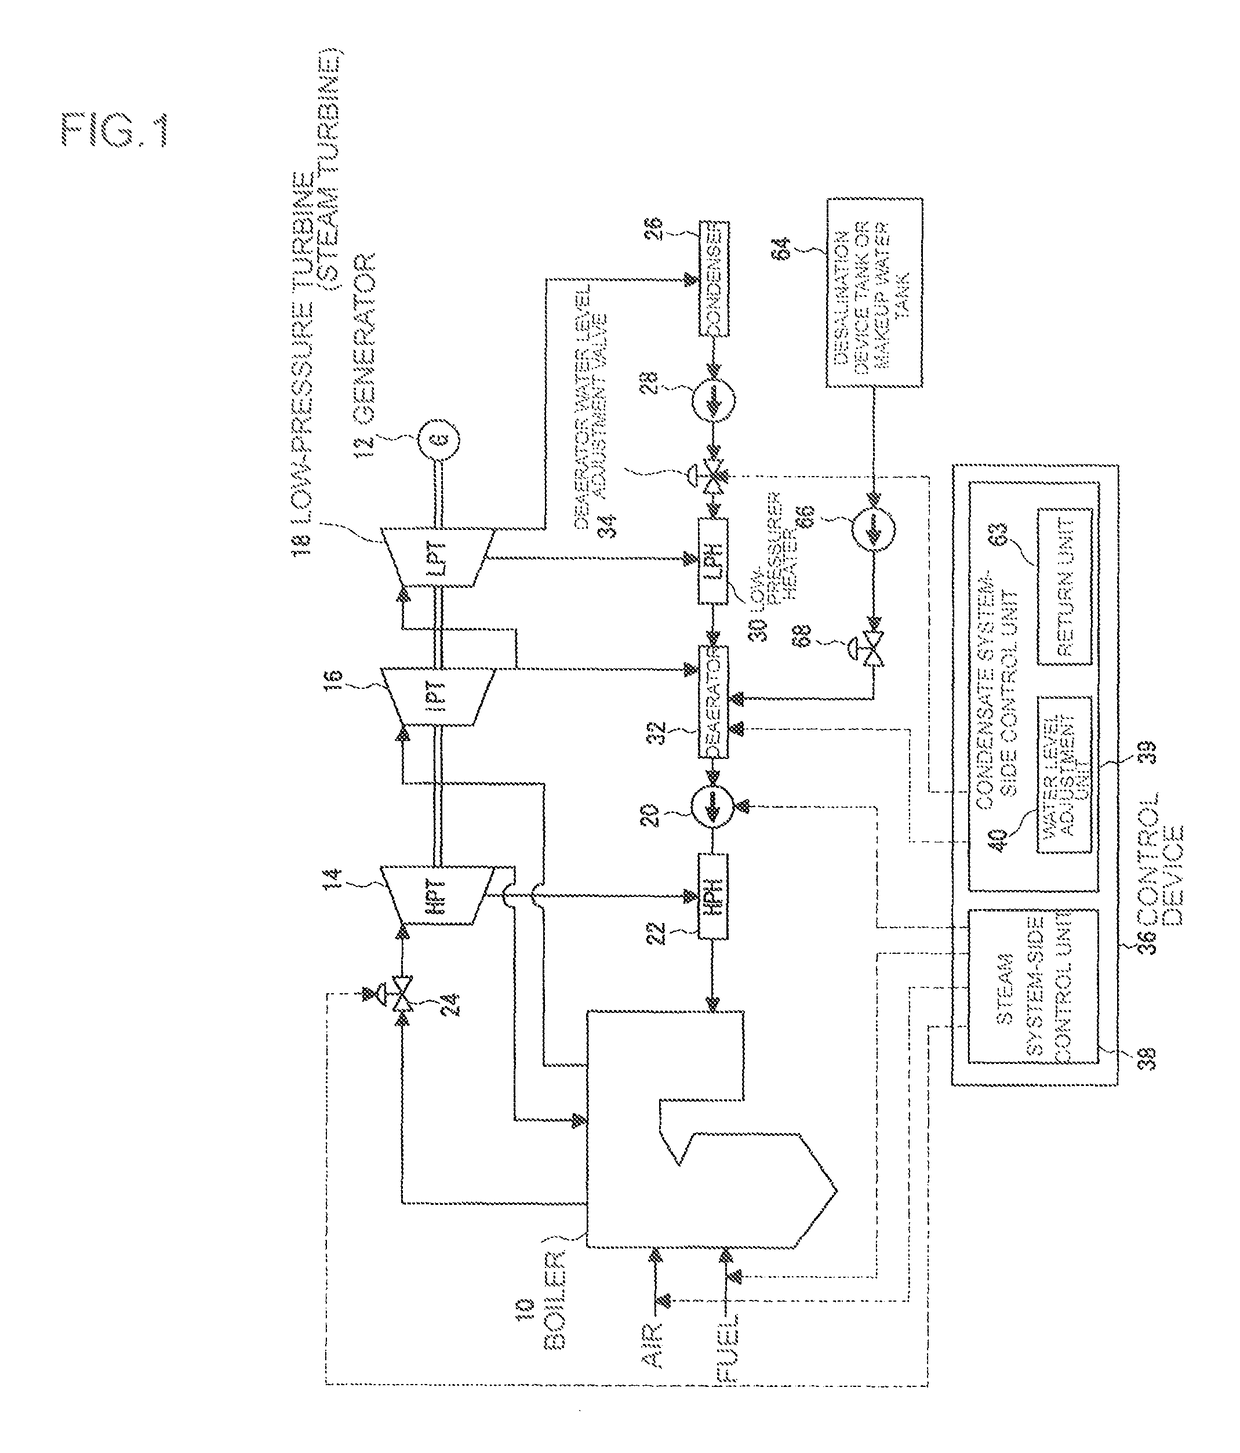 Condensate flow rate control device and condensate flow rate control method for power plant